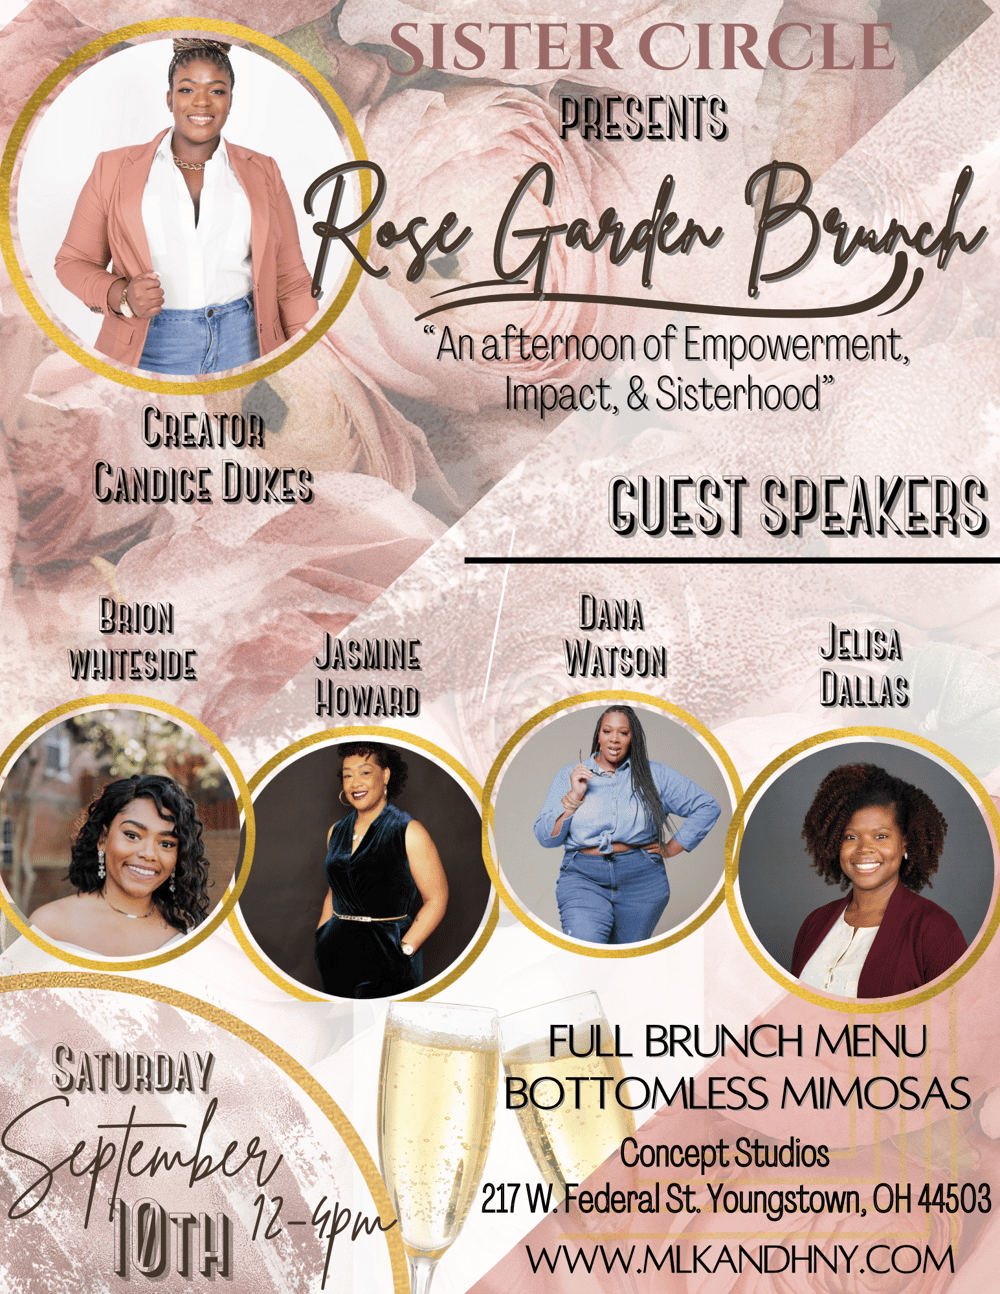 SISTER CIRCLE BRUNCH Tickets 